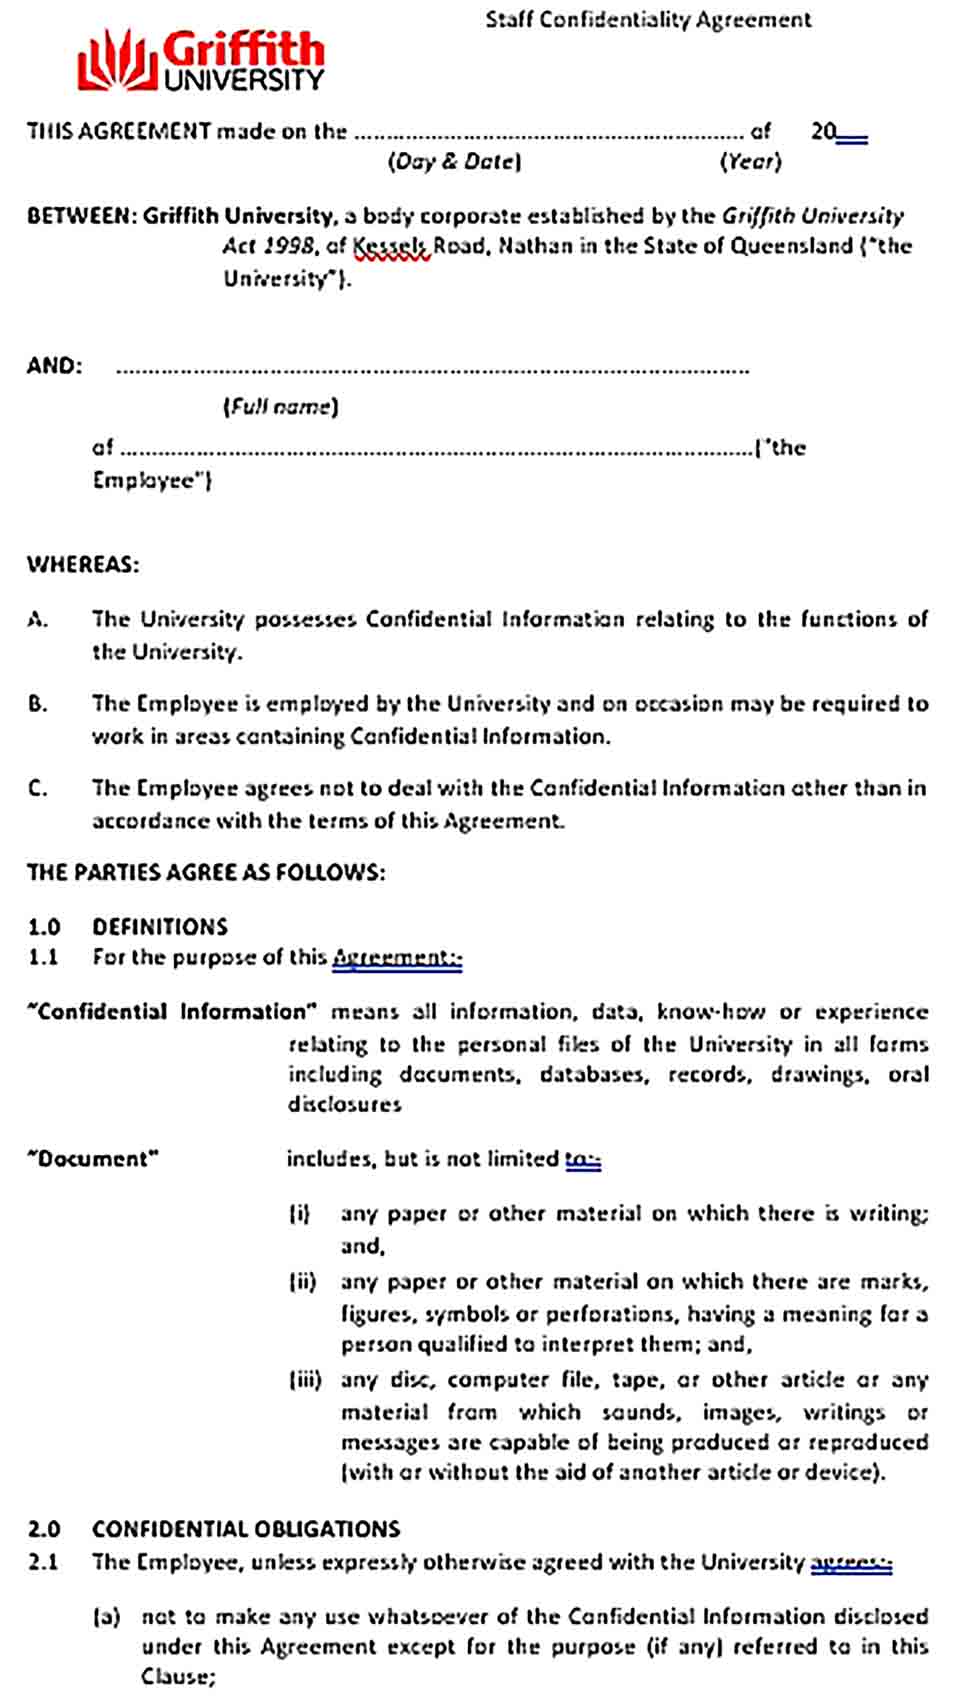 Sample Staff Confidentiality Agreement